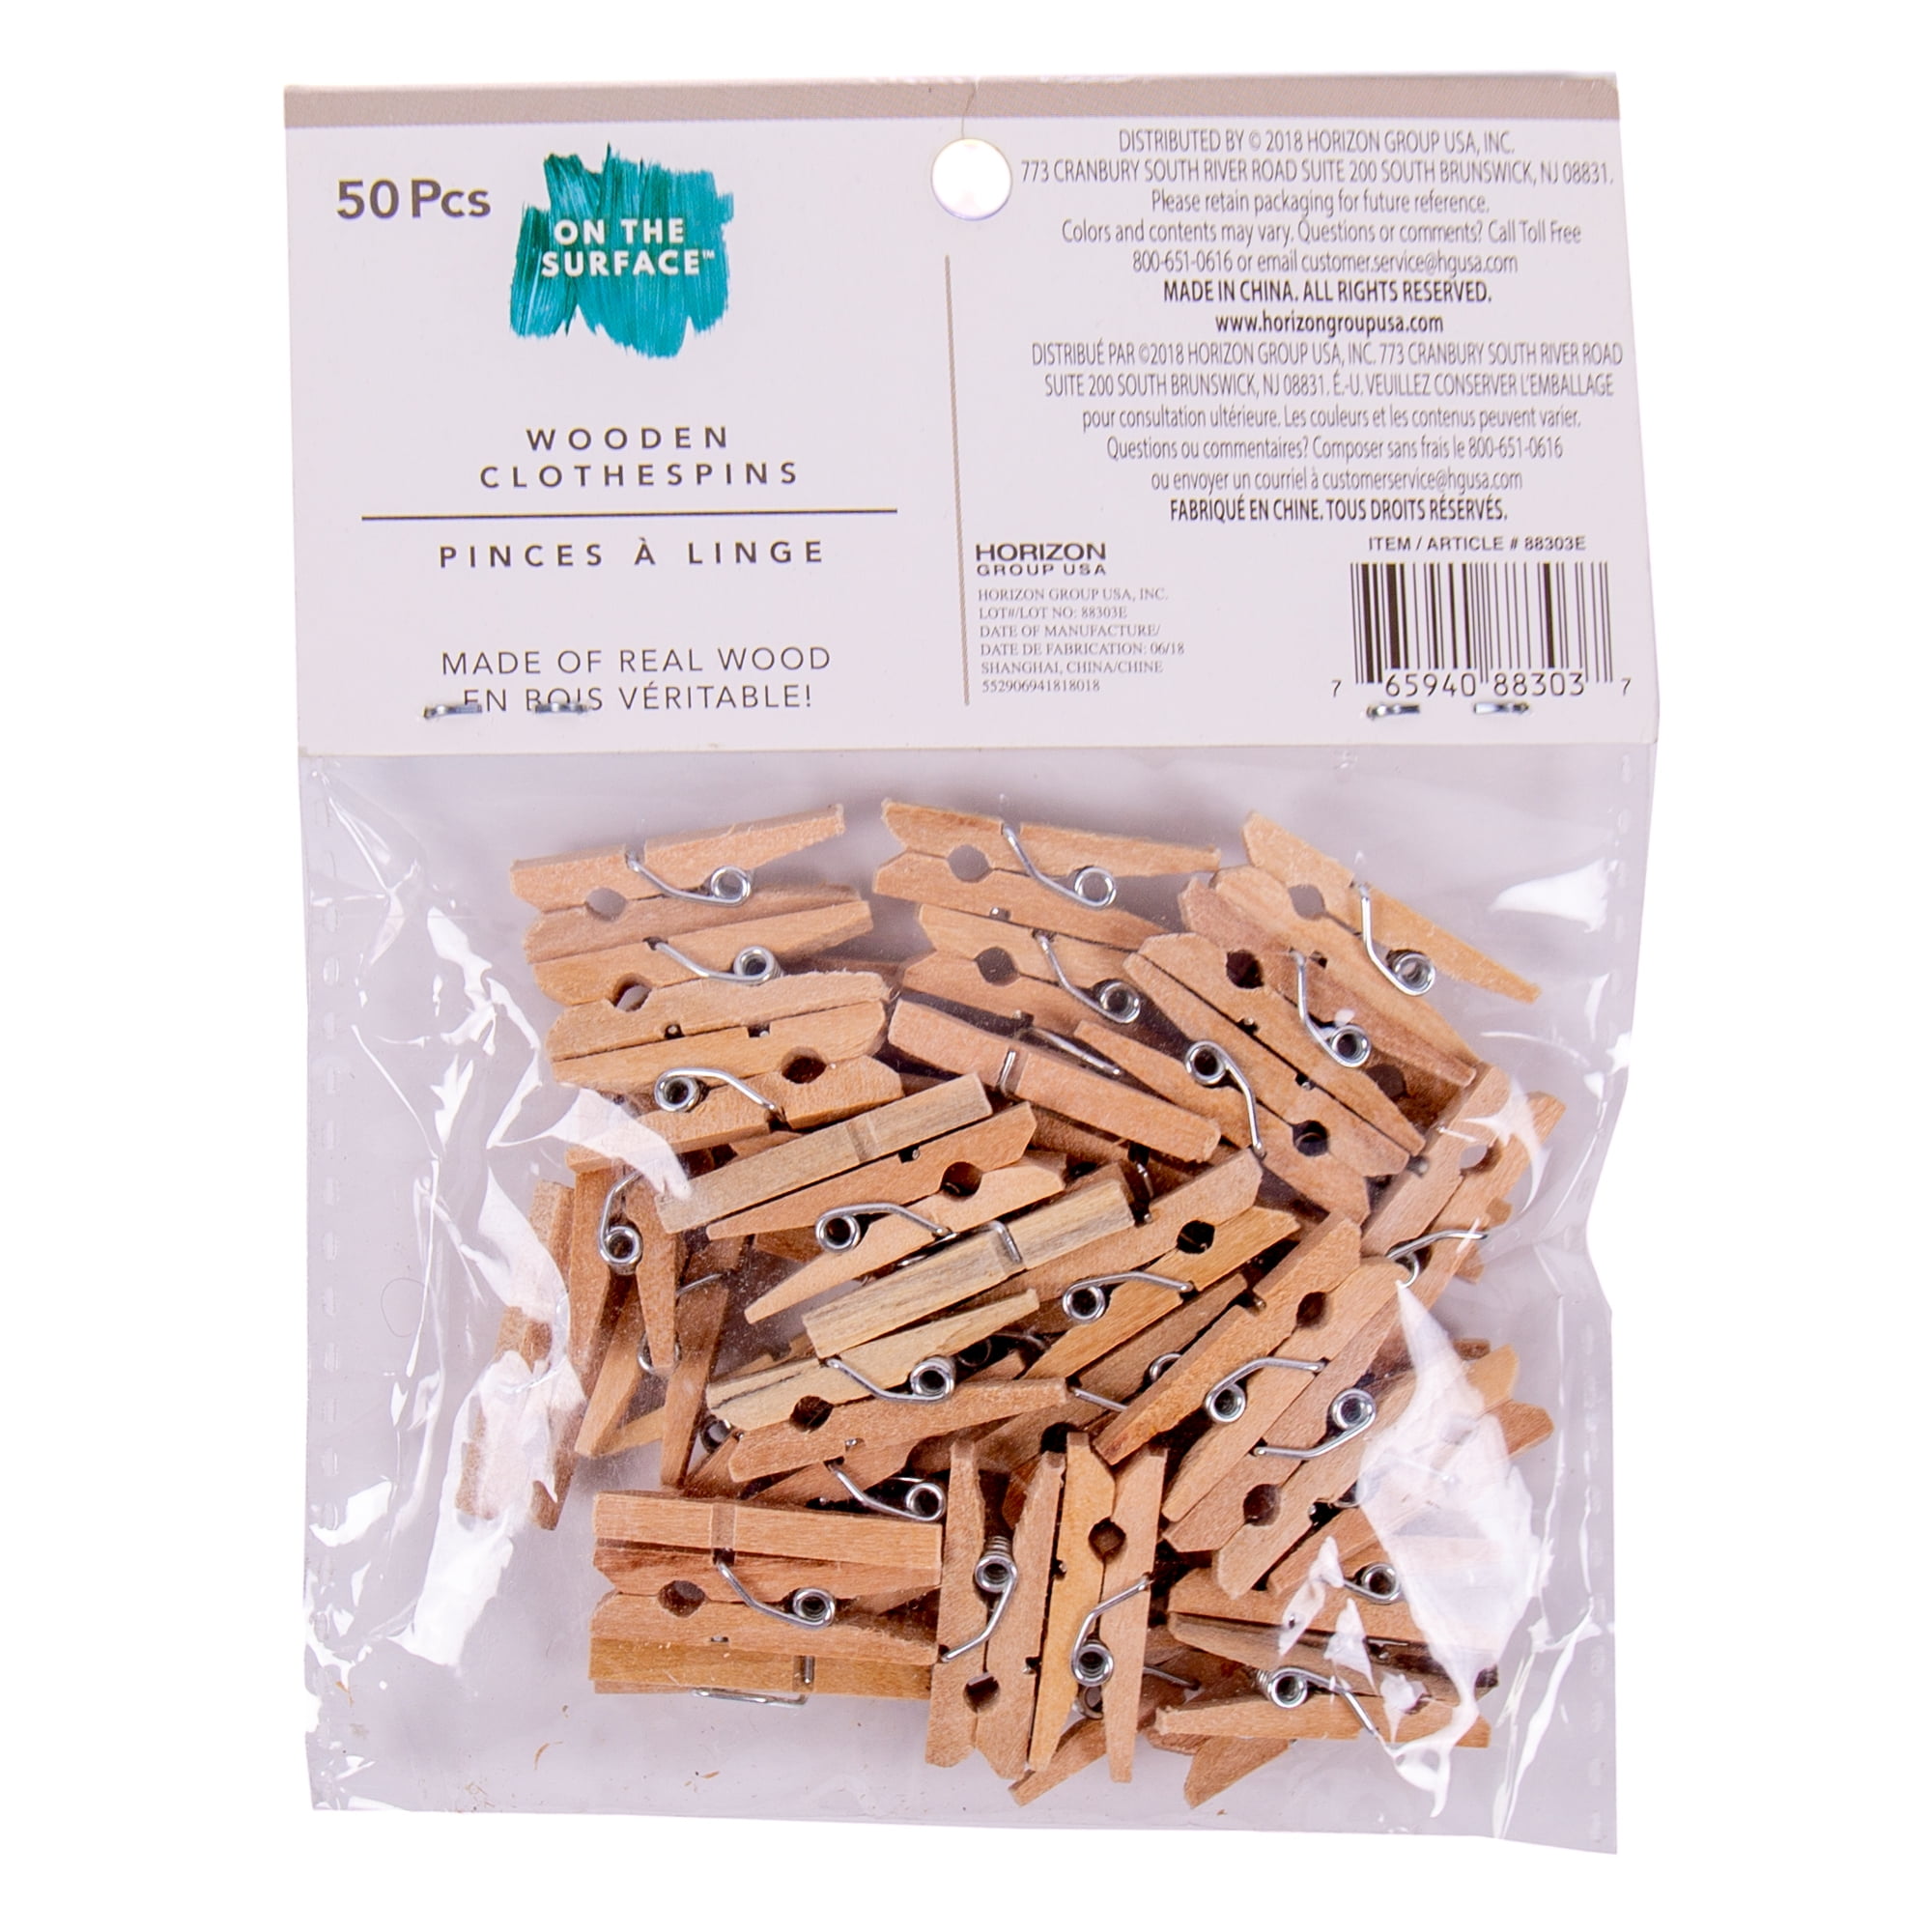 7DWF- Teeny Tiny Clothespins, I found a bag of these very s…